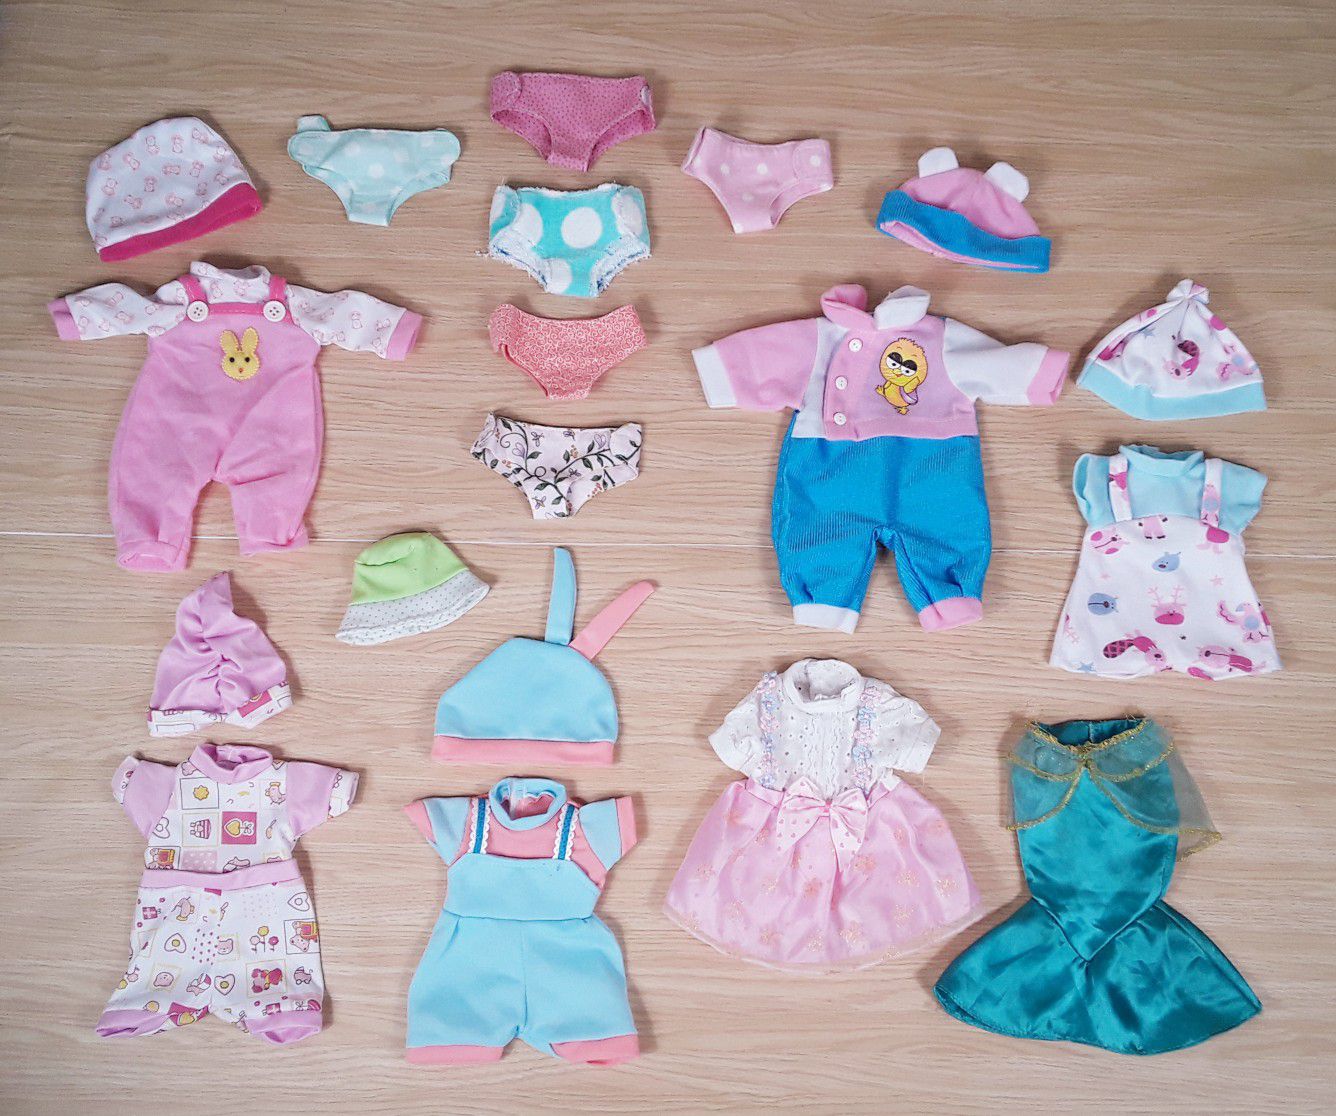 12" Baby Doll Clothes & Diapers